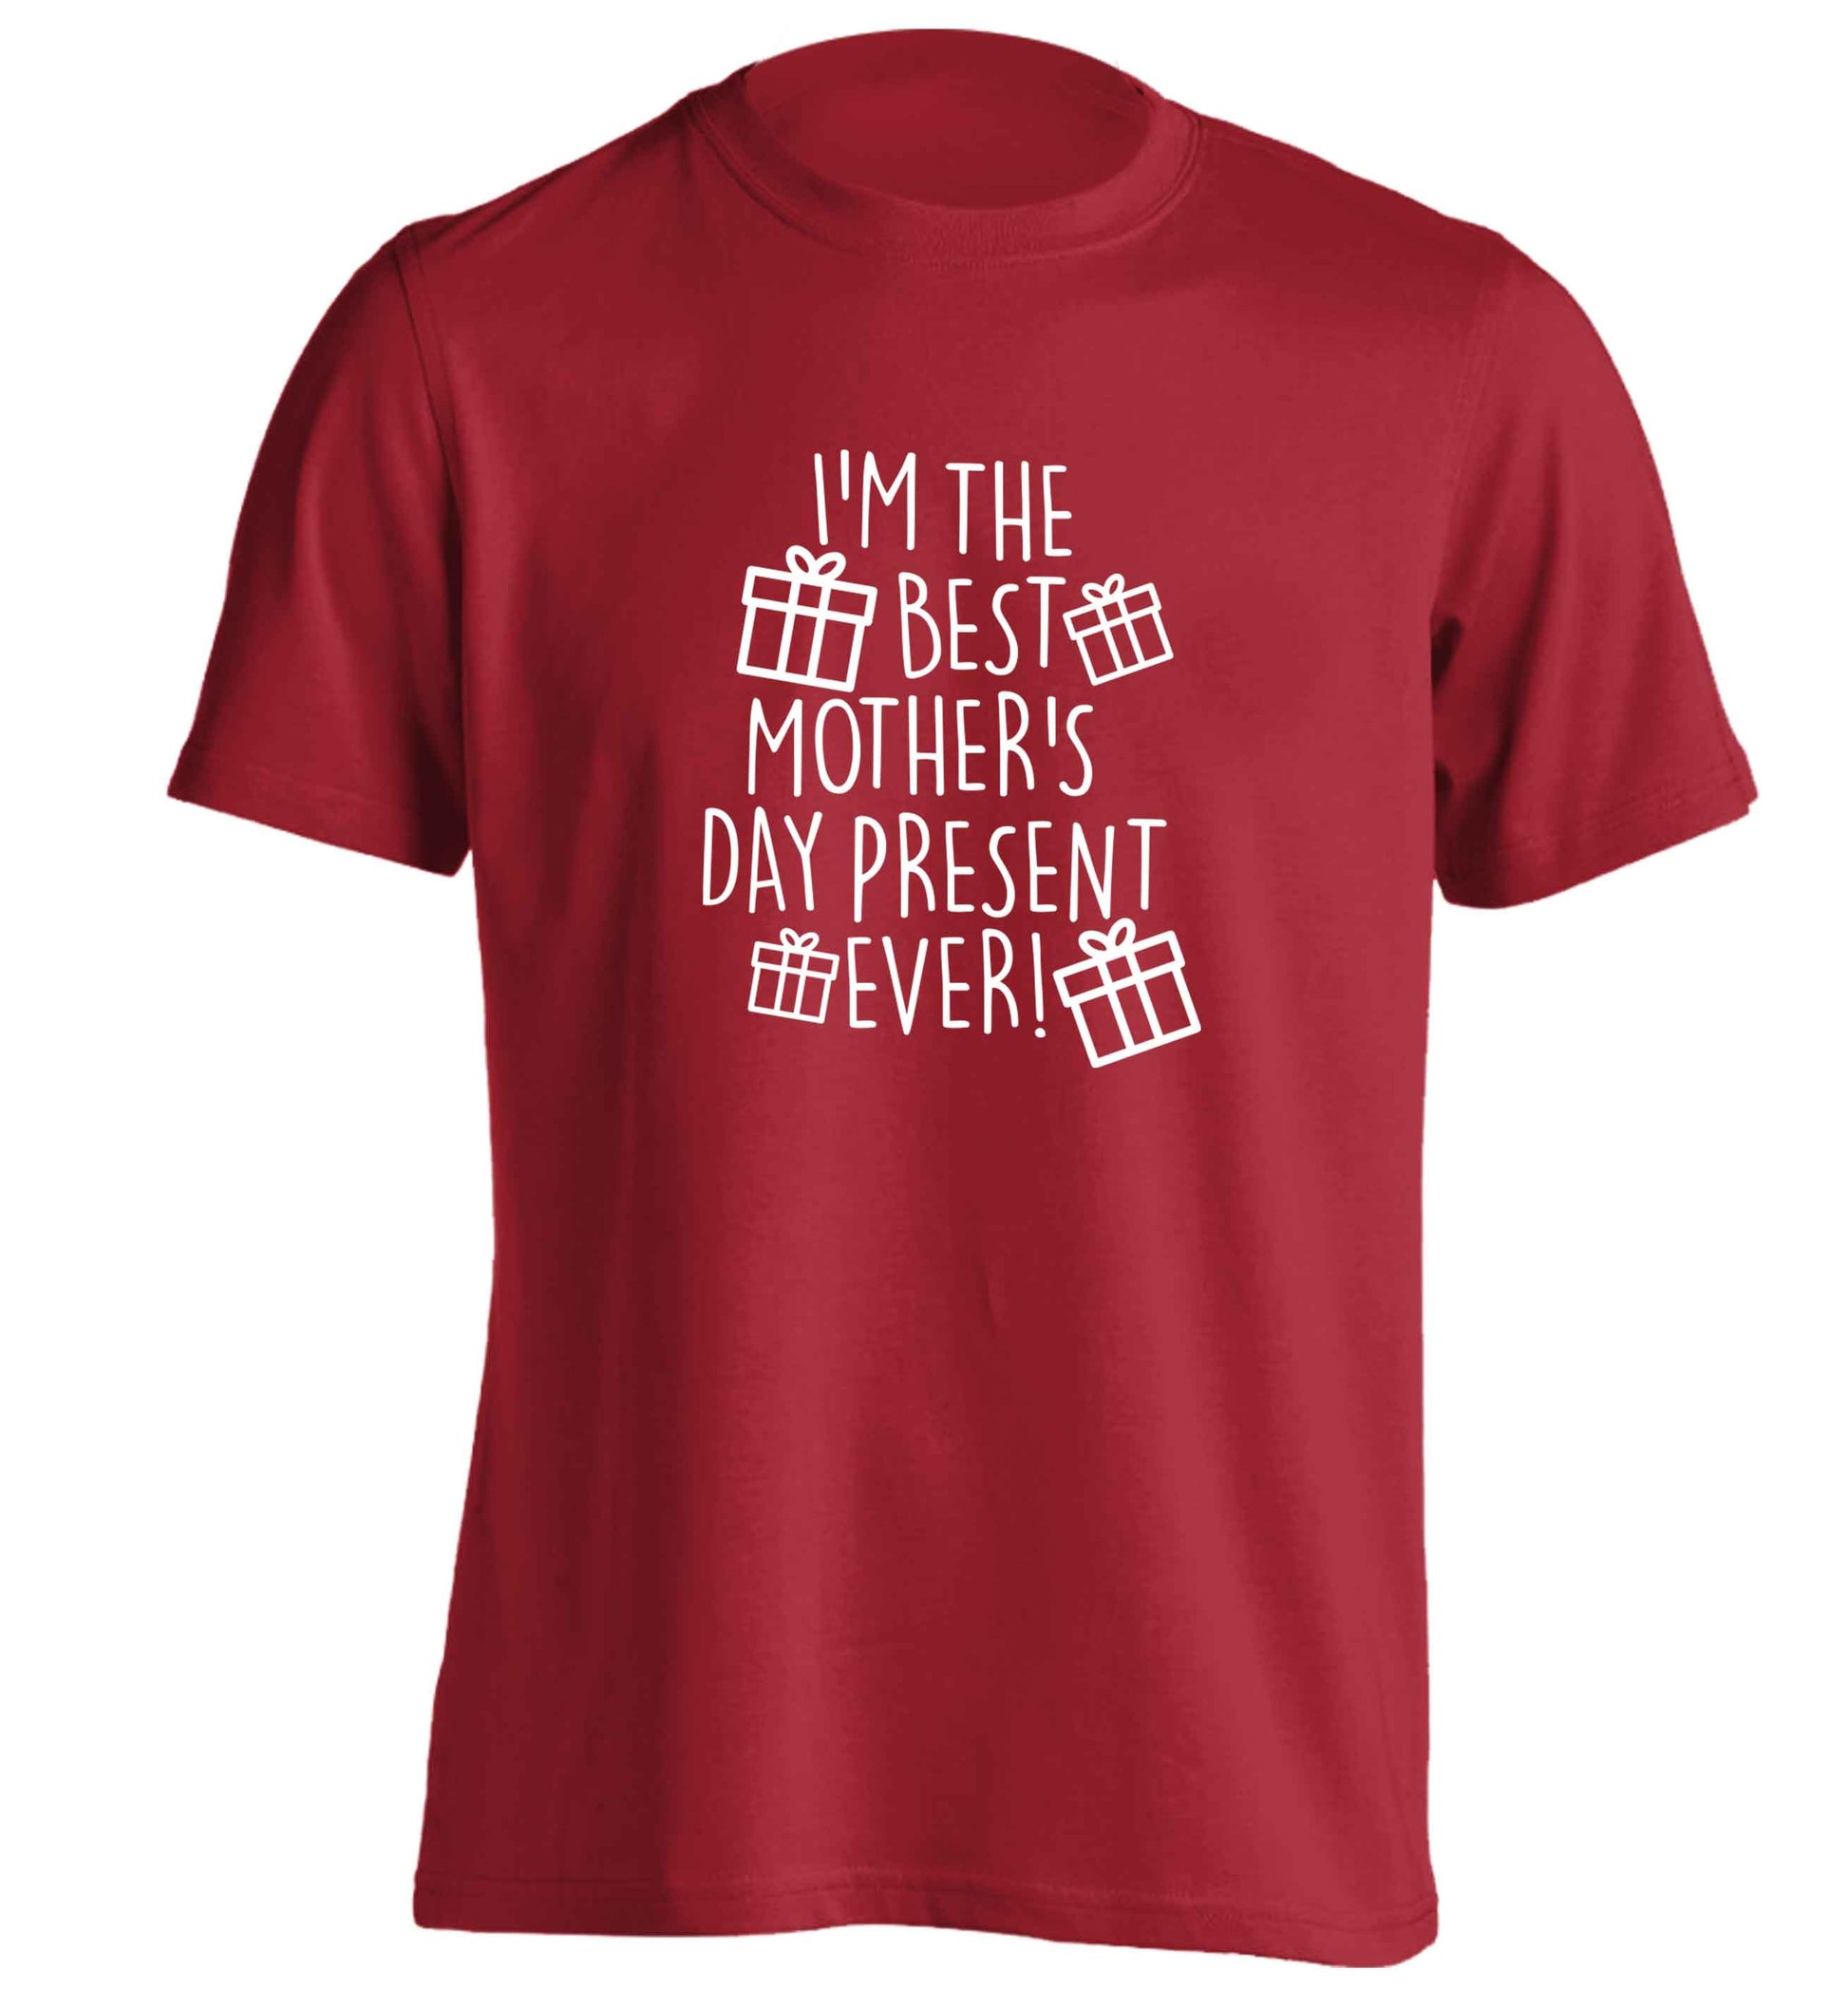 I'm the best mother's day present ever! adults unisex red Tshirt 2XL